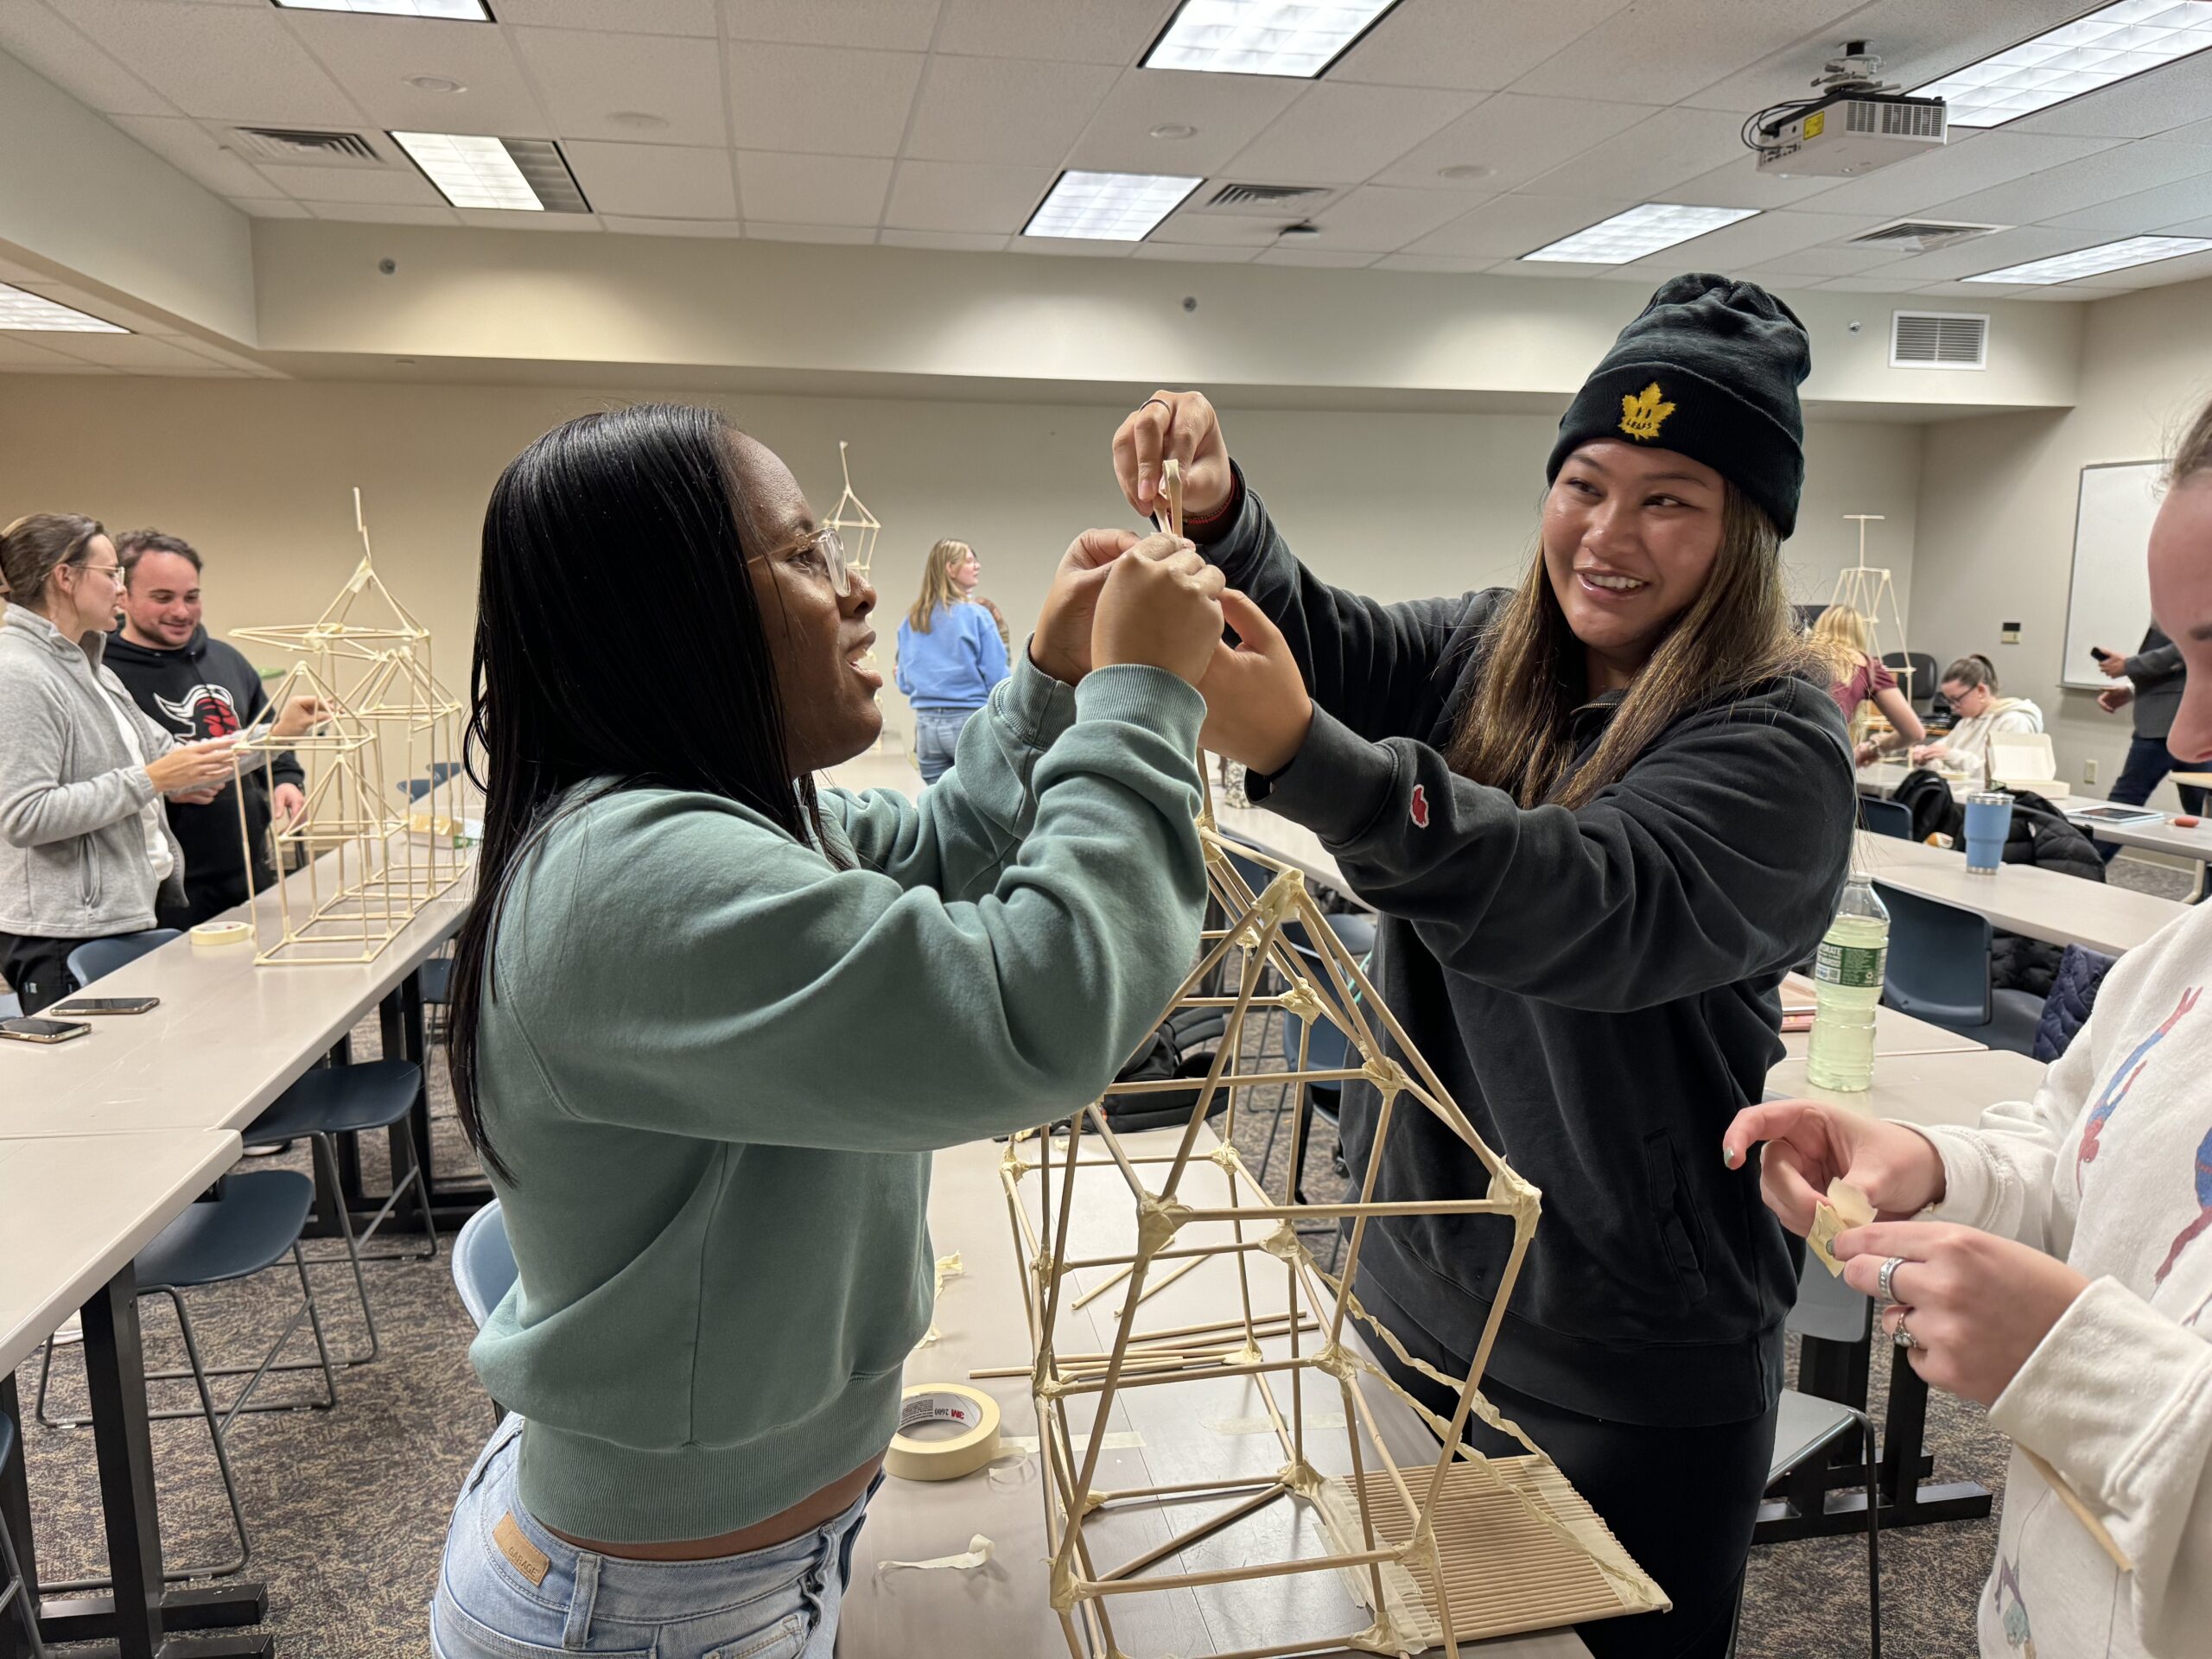 OTD students smiling and building a structure